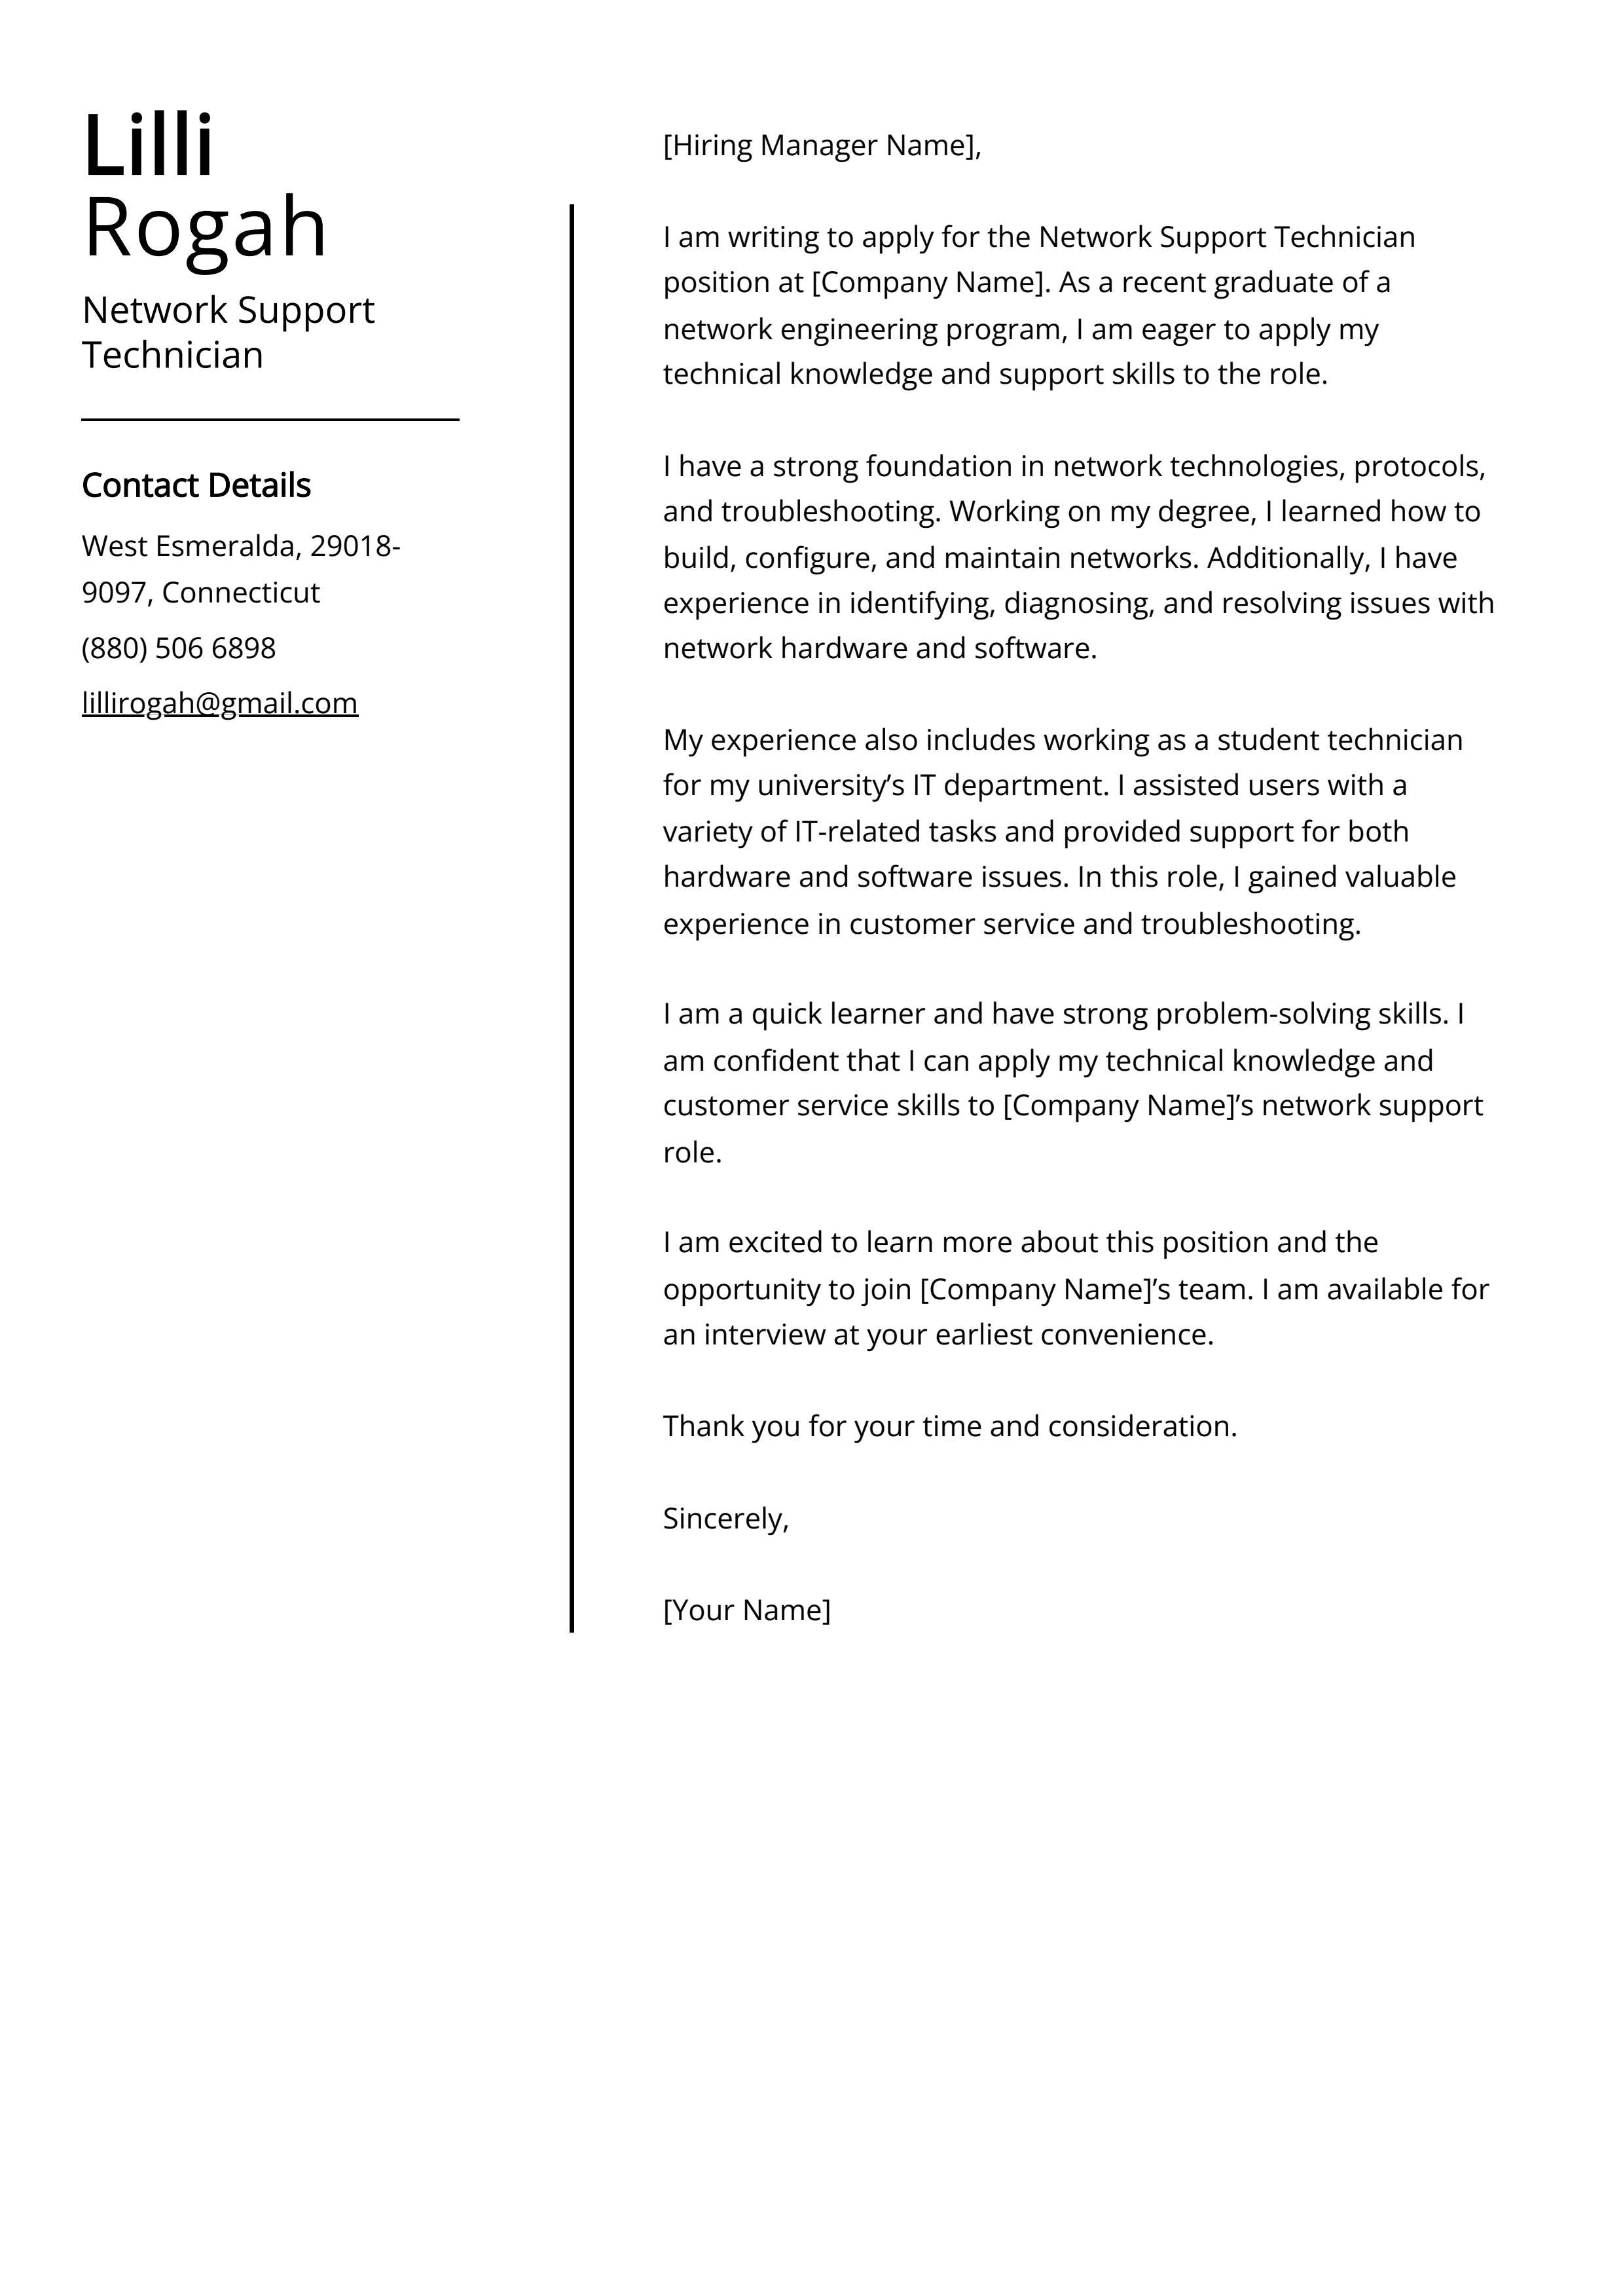 Network Support Technician Cover Letter Example